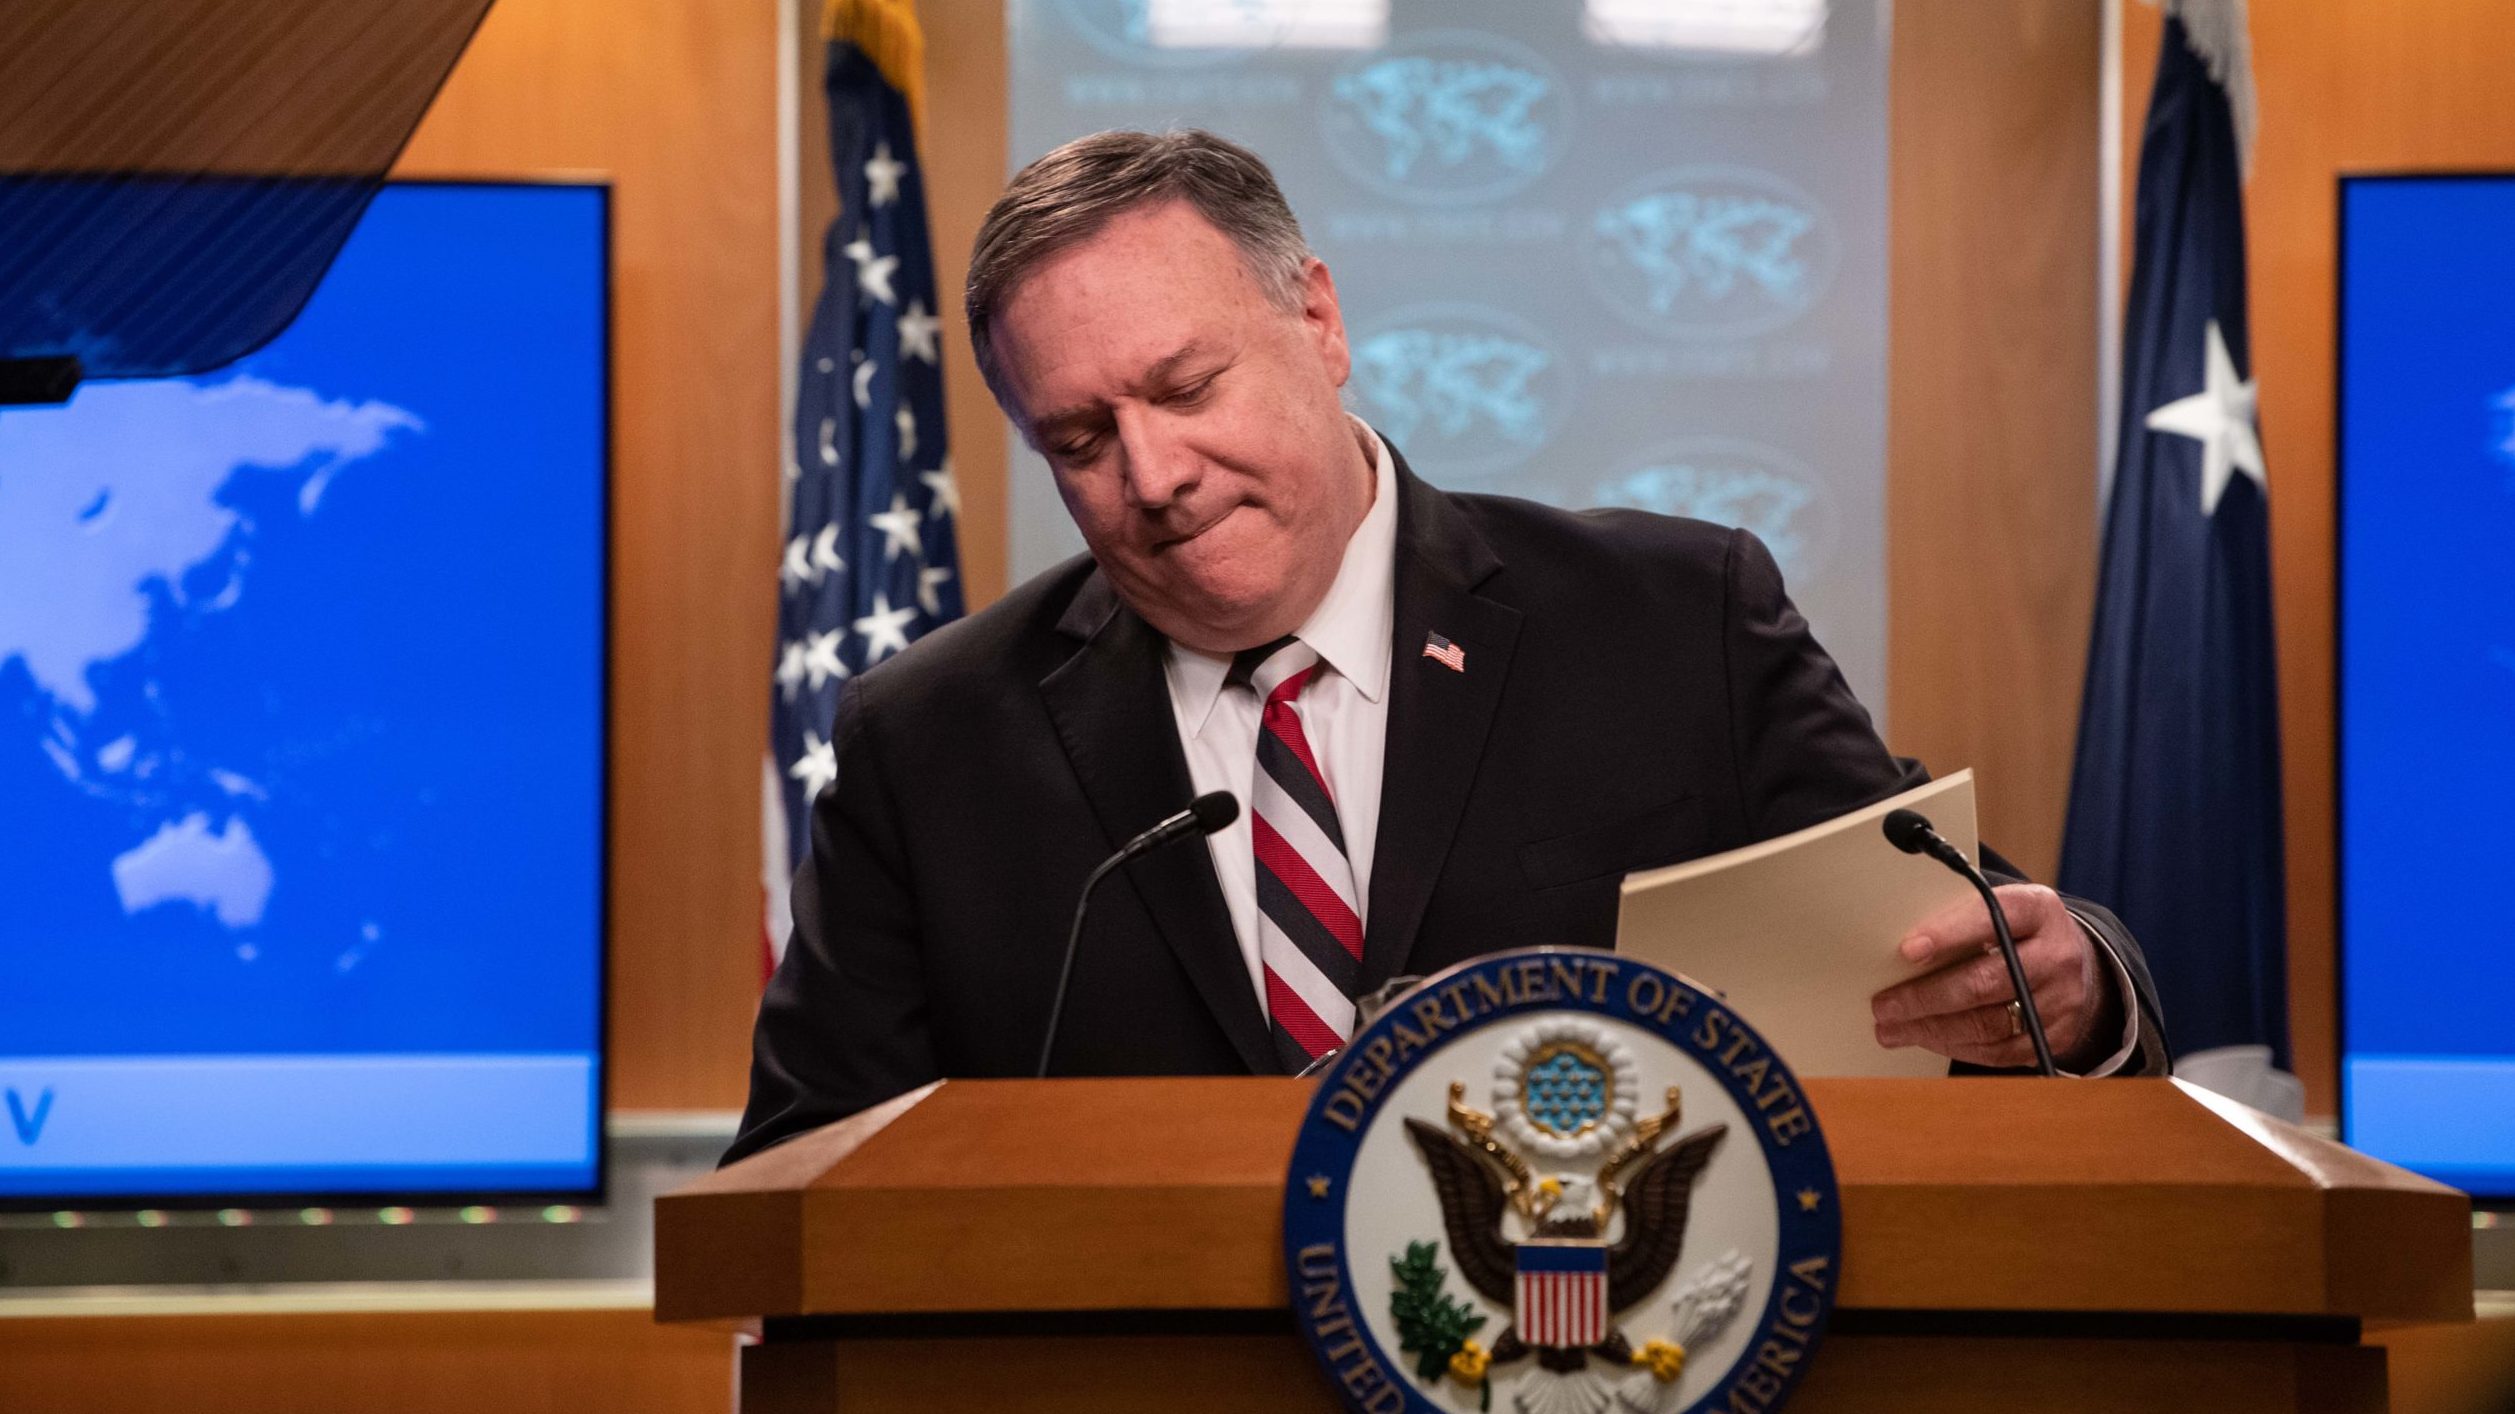 Pompeo in Afghanistan, Apparently to Encourage Movement on Peace Talks